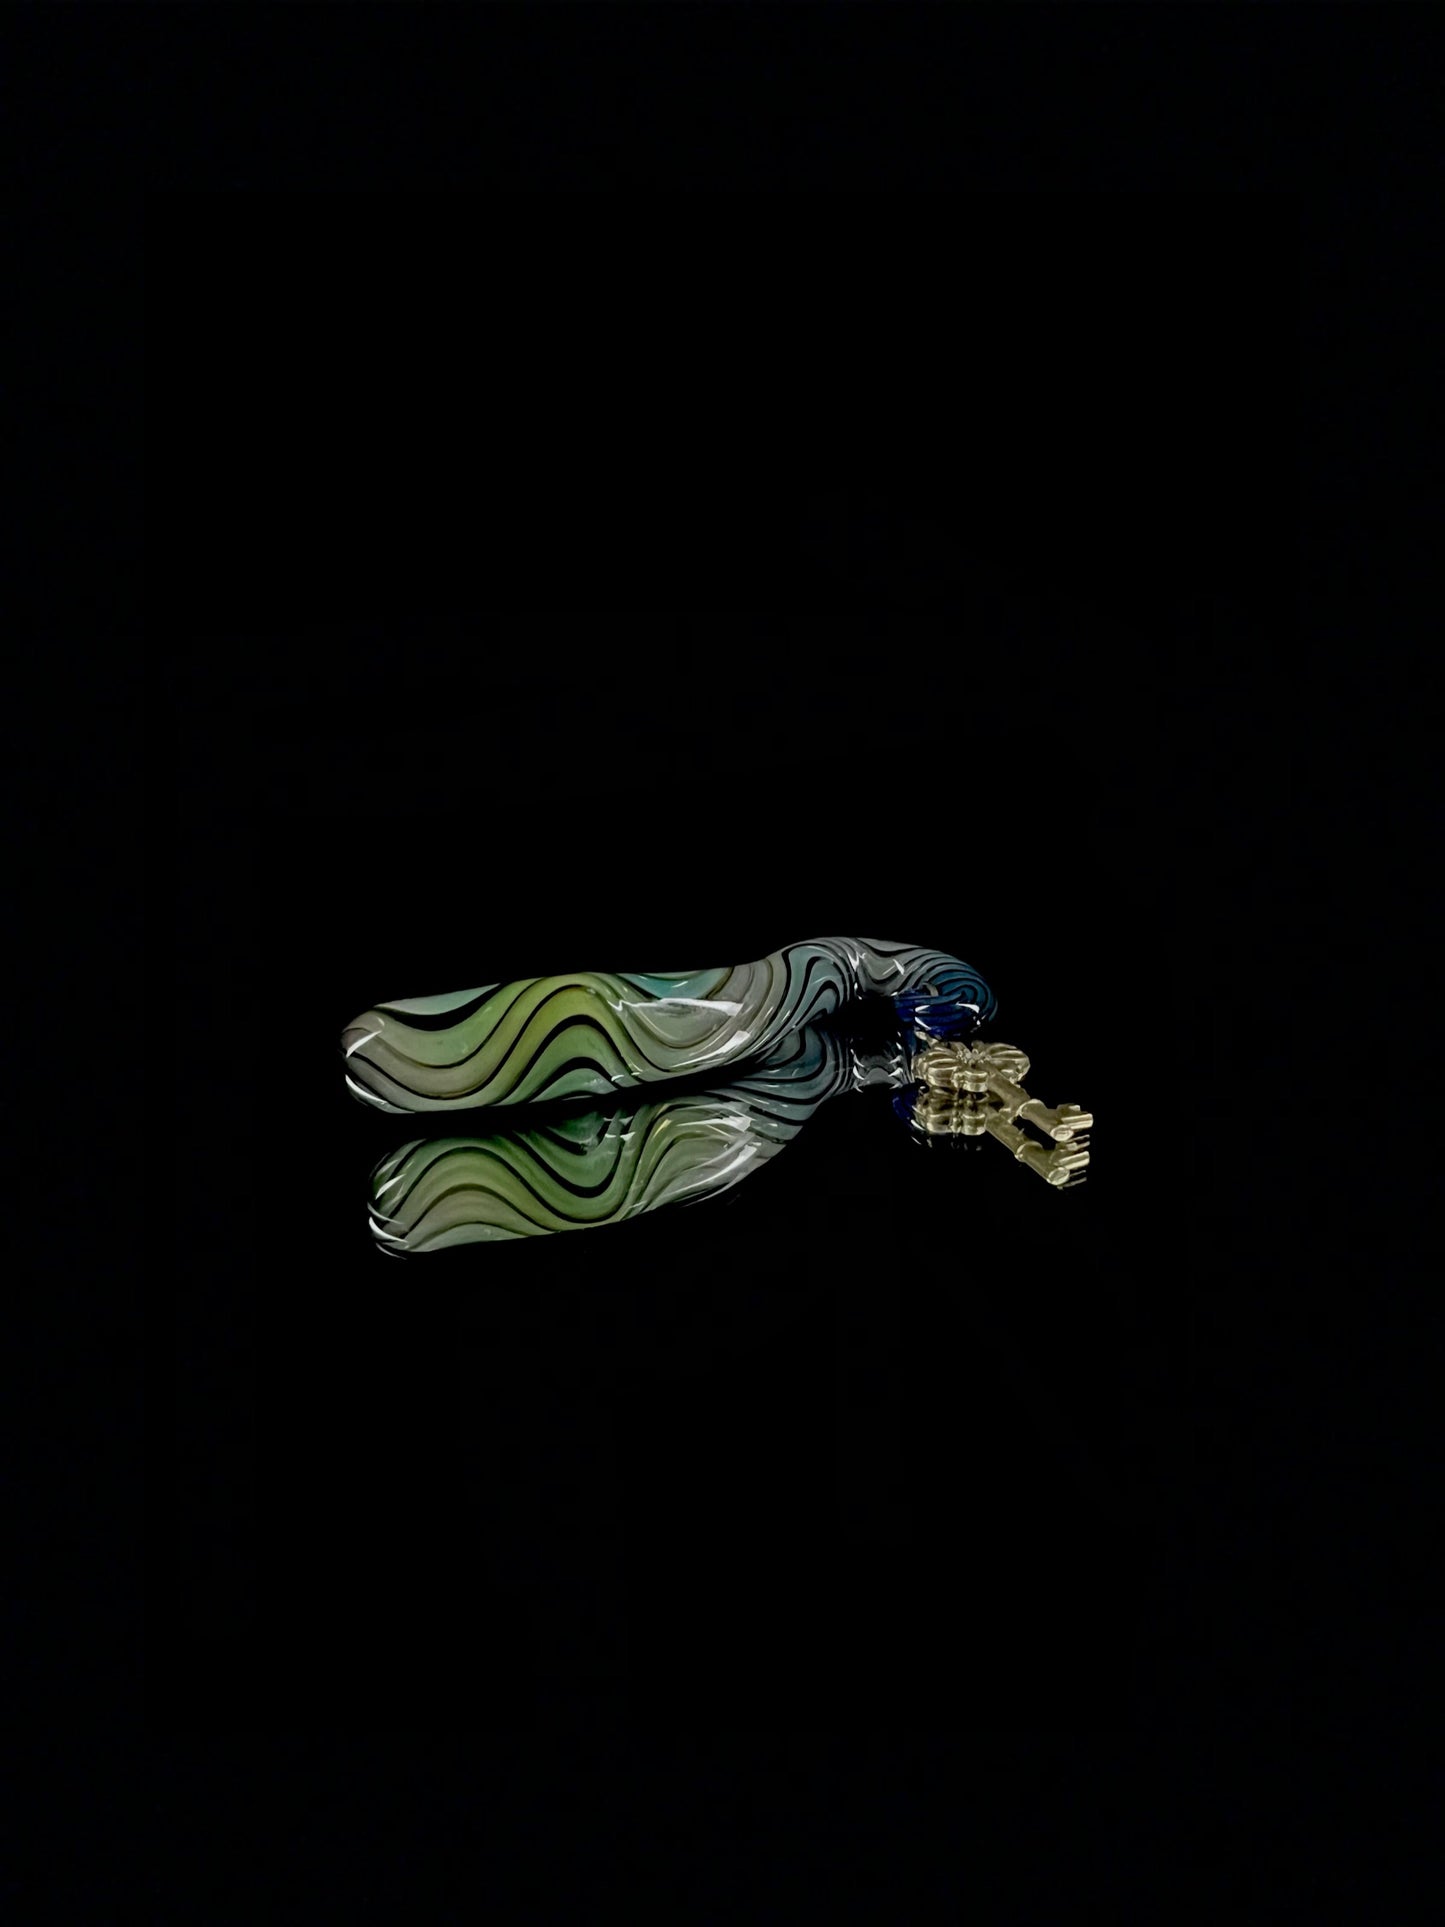 14mm stopper with key by Leviathan Glass